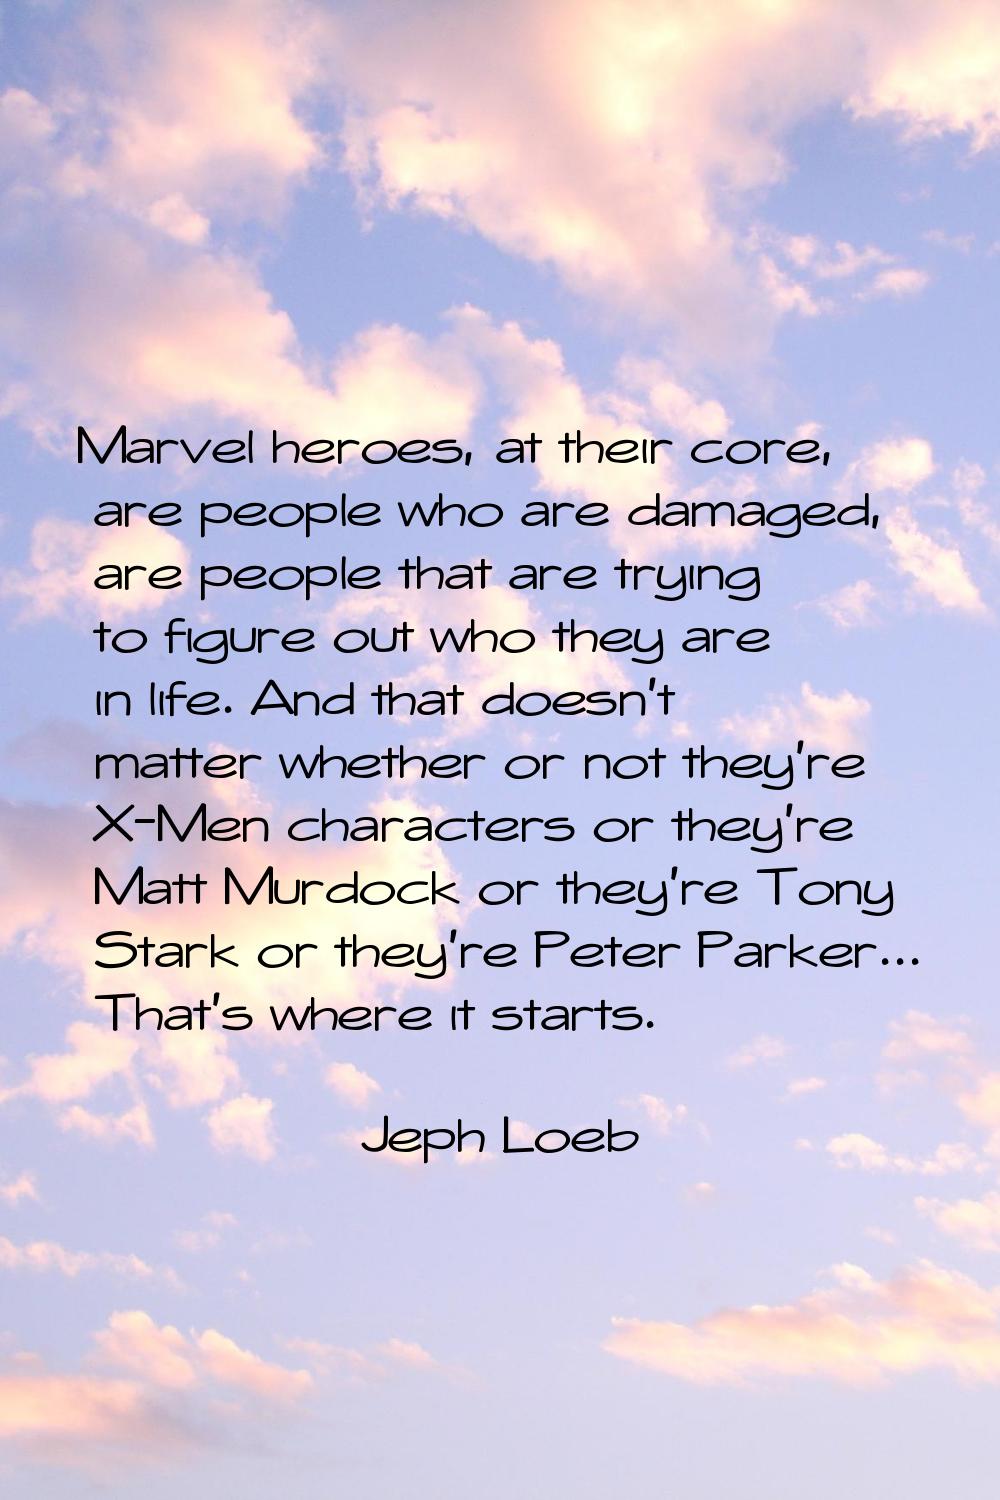 Marvel heroes, at their core, are people who are damaged, are people that are trying to figure out 